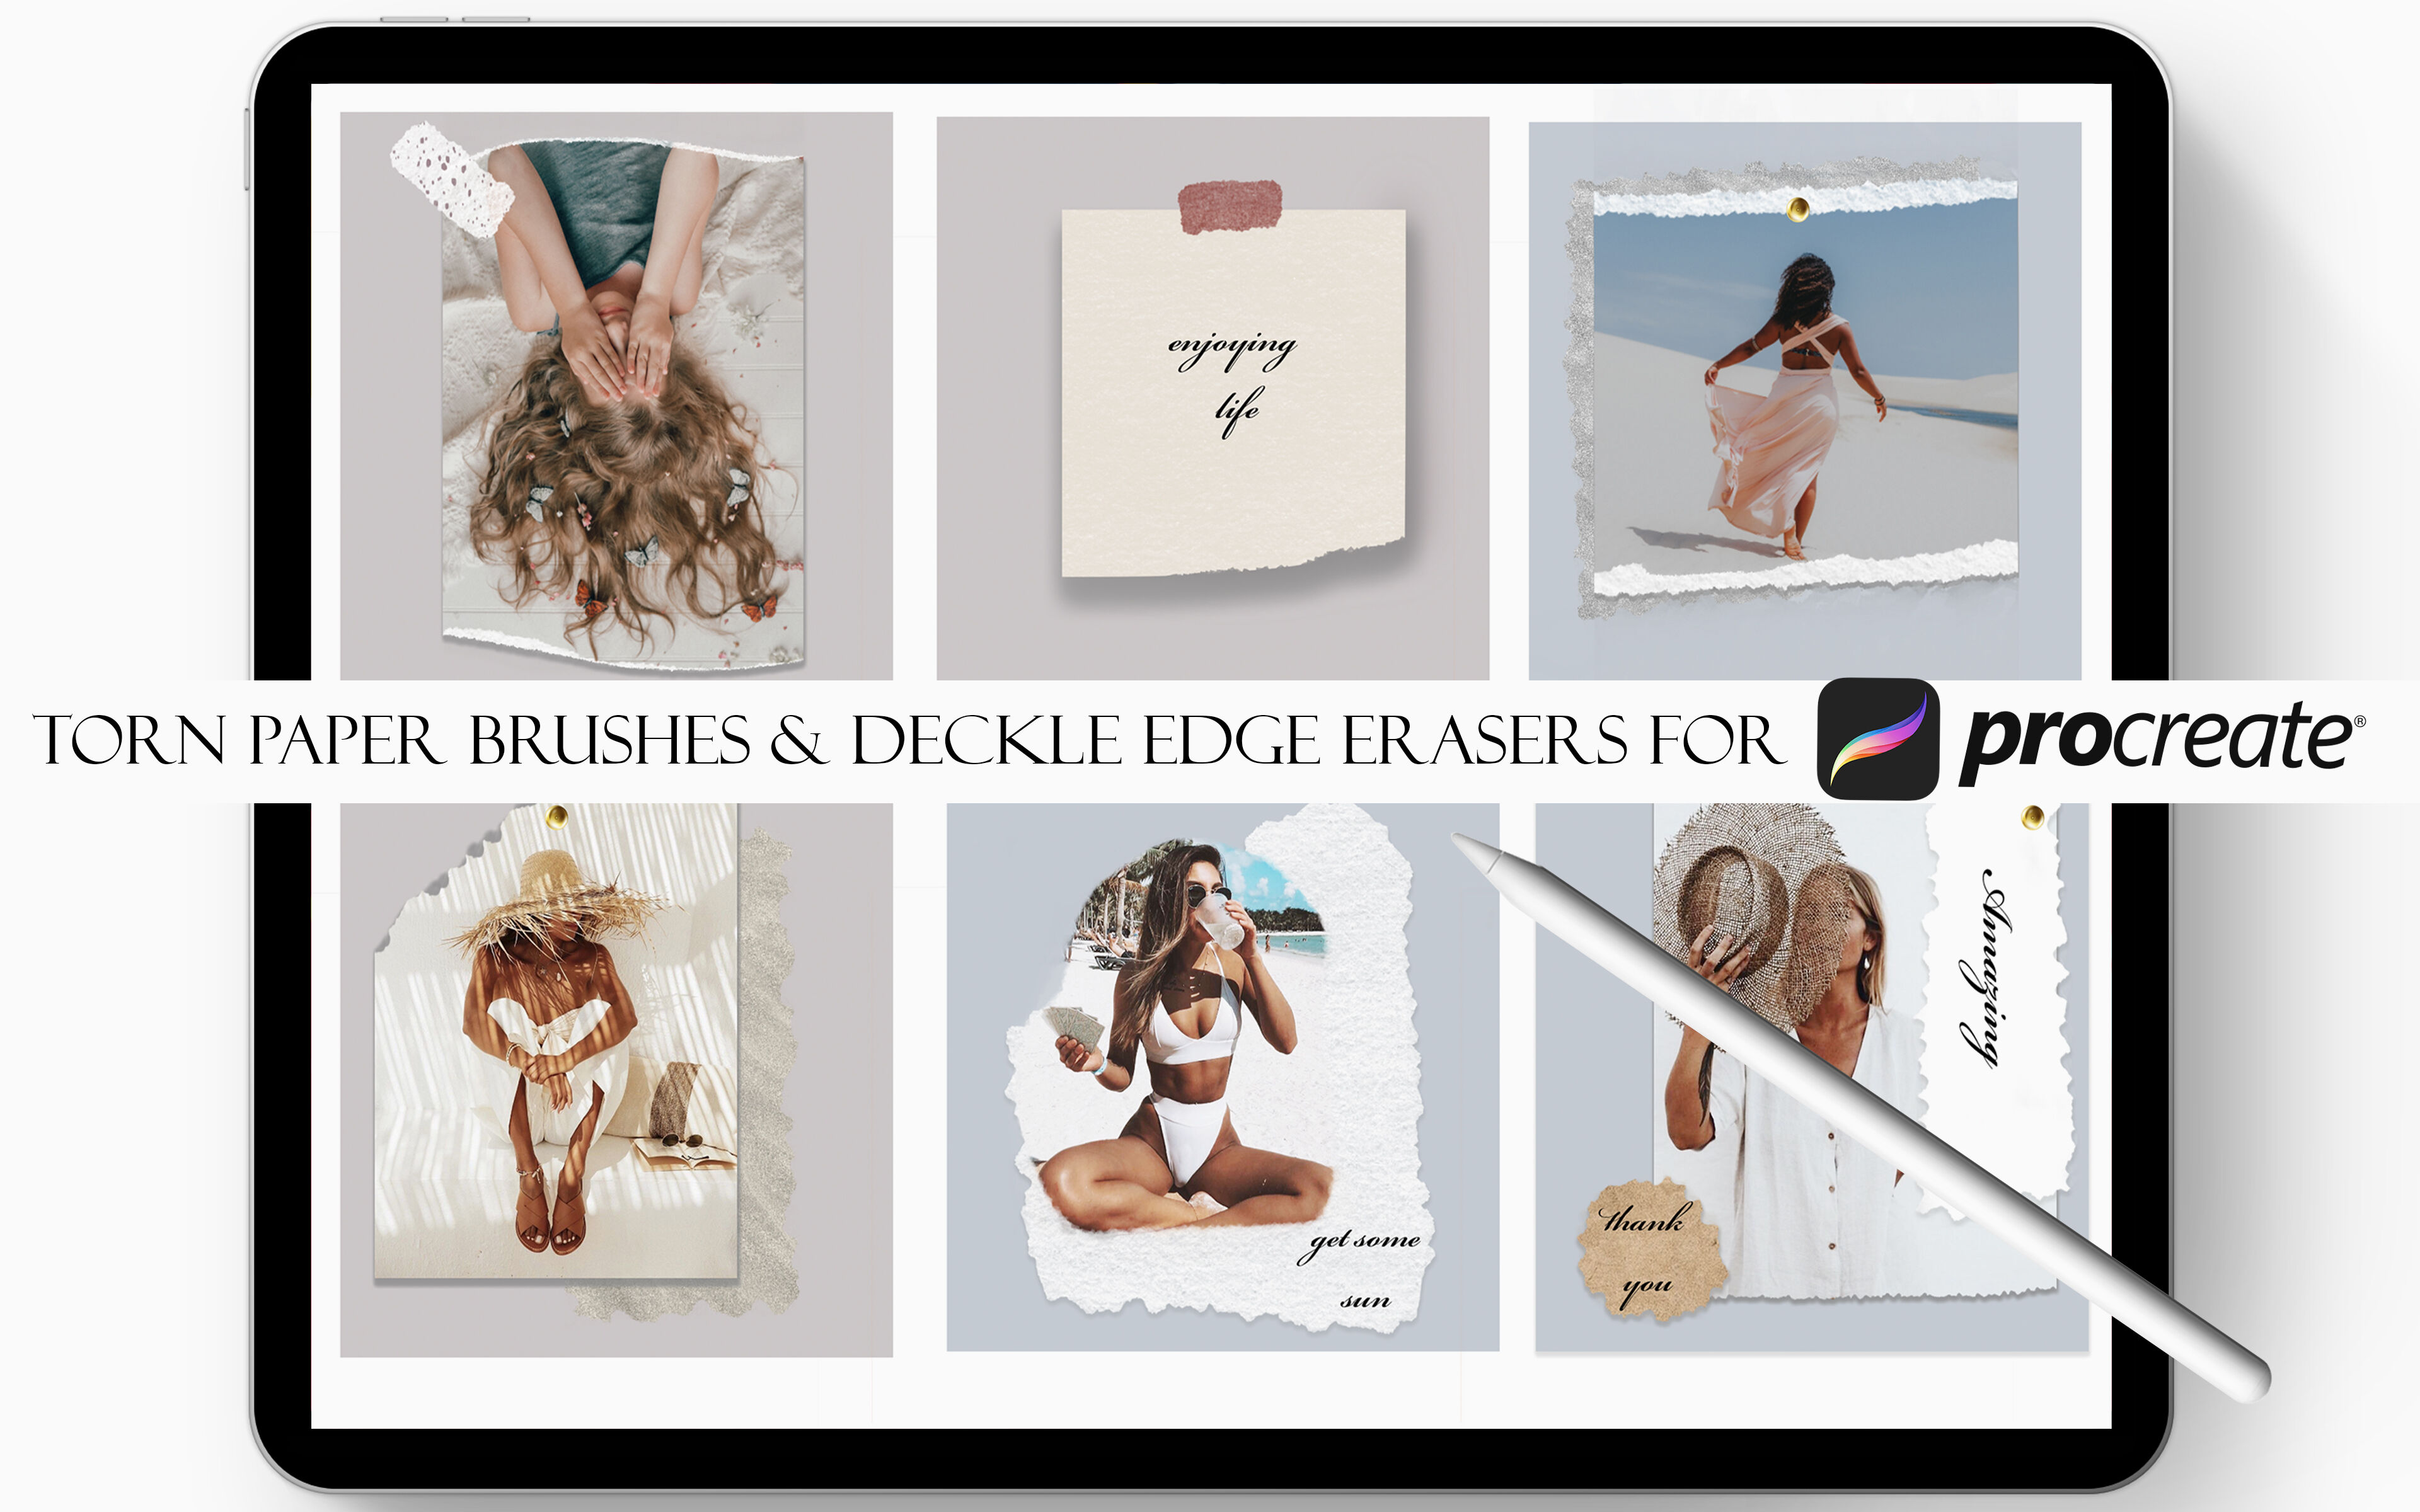 Introductory and Craft Brushes Archives - The Deckle Edge